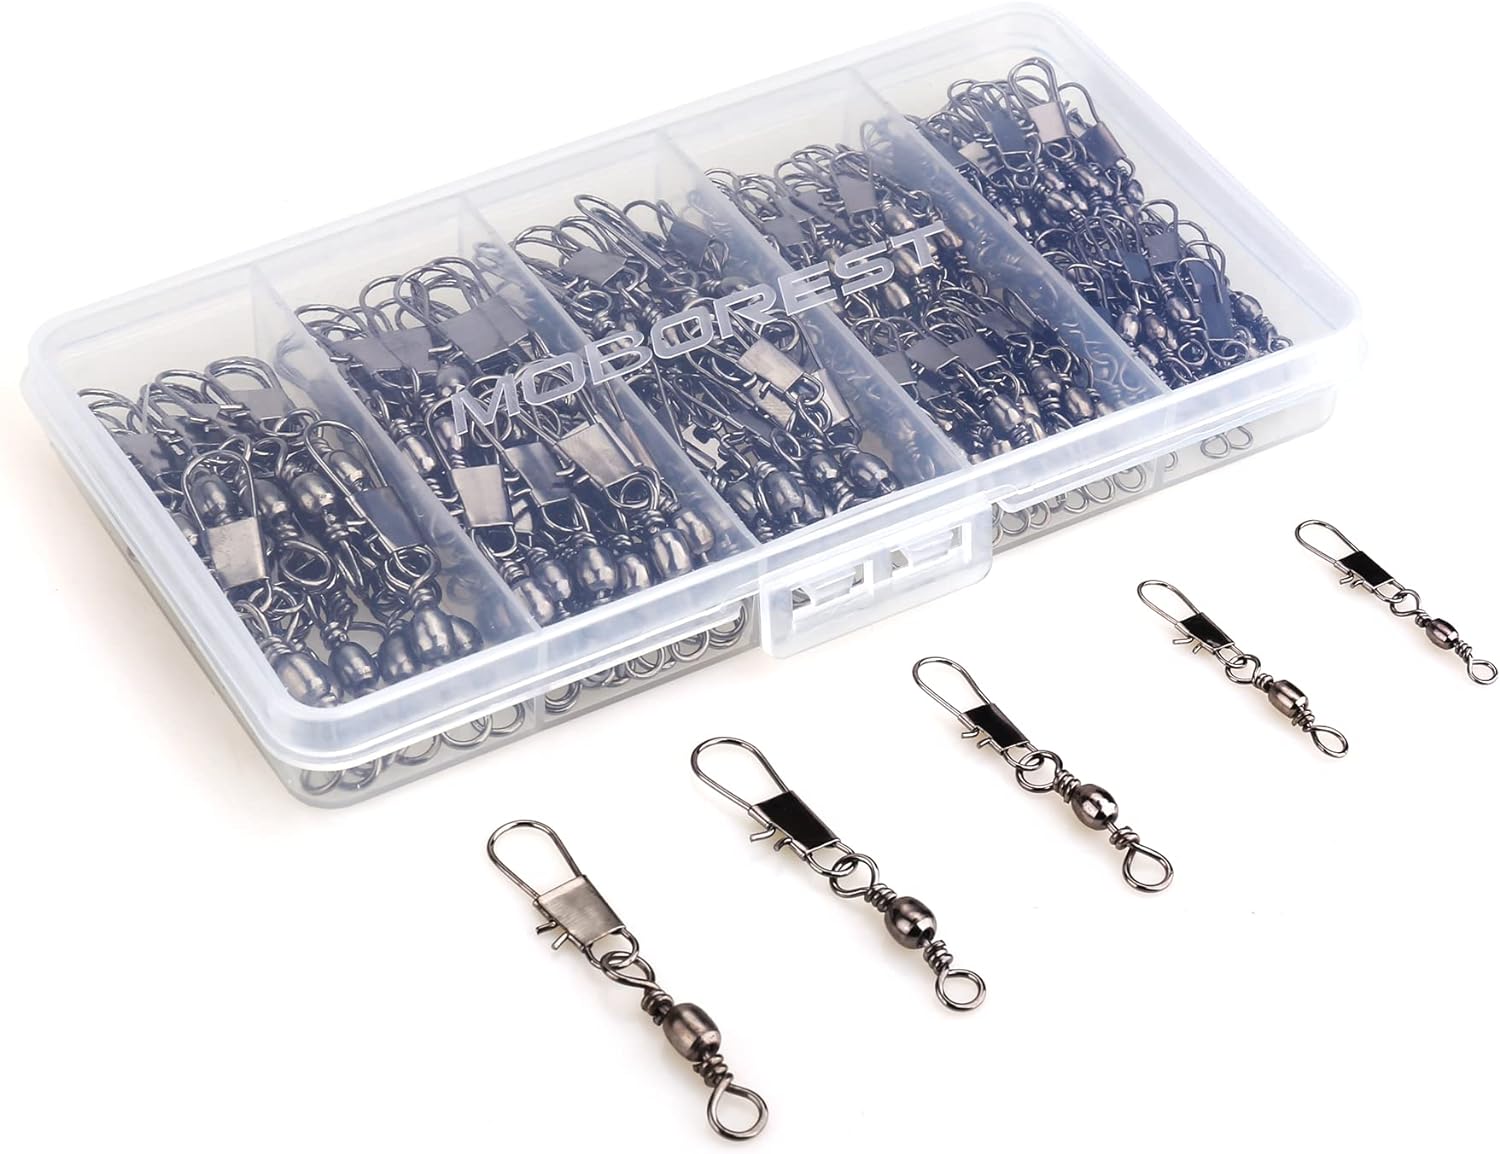 200PCS Barrel Snap Swivel Fishing Accessories, Premium Fishing Gear Equipment with Ball Bearing Swivels Snaps Connector for Quick Connect Fishing Lures